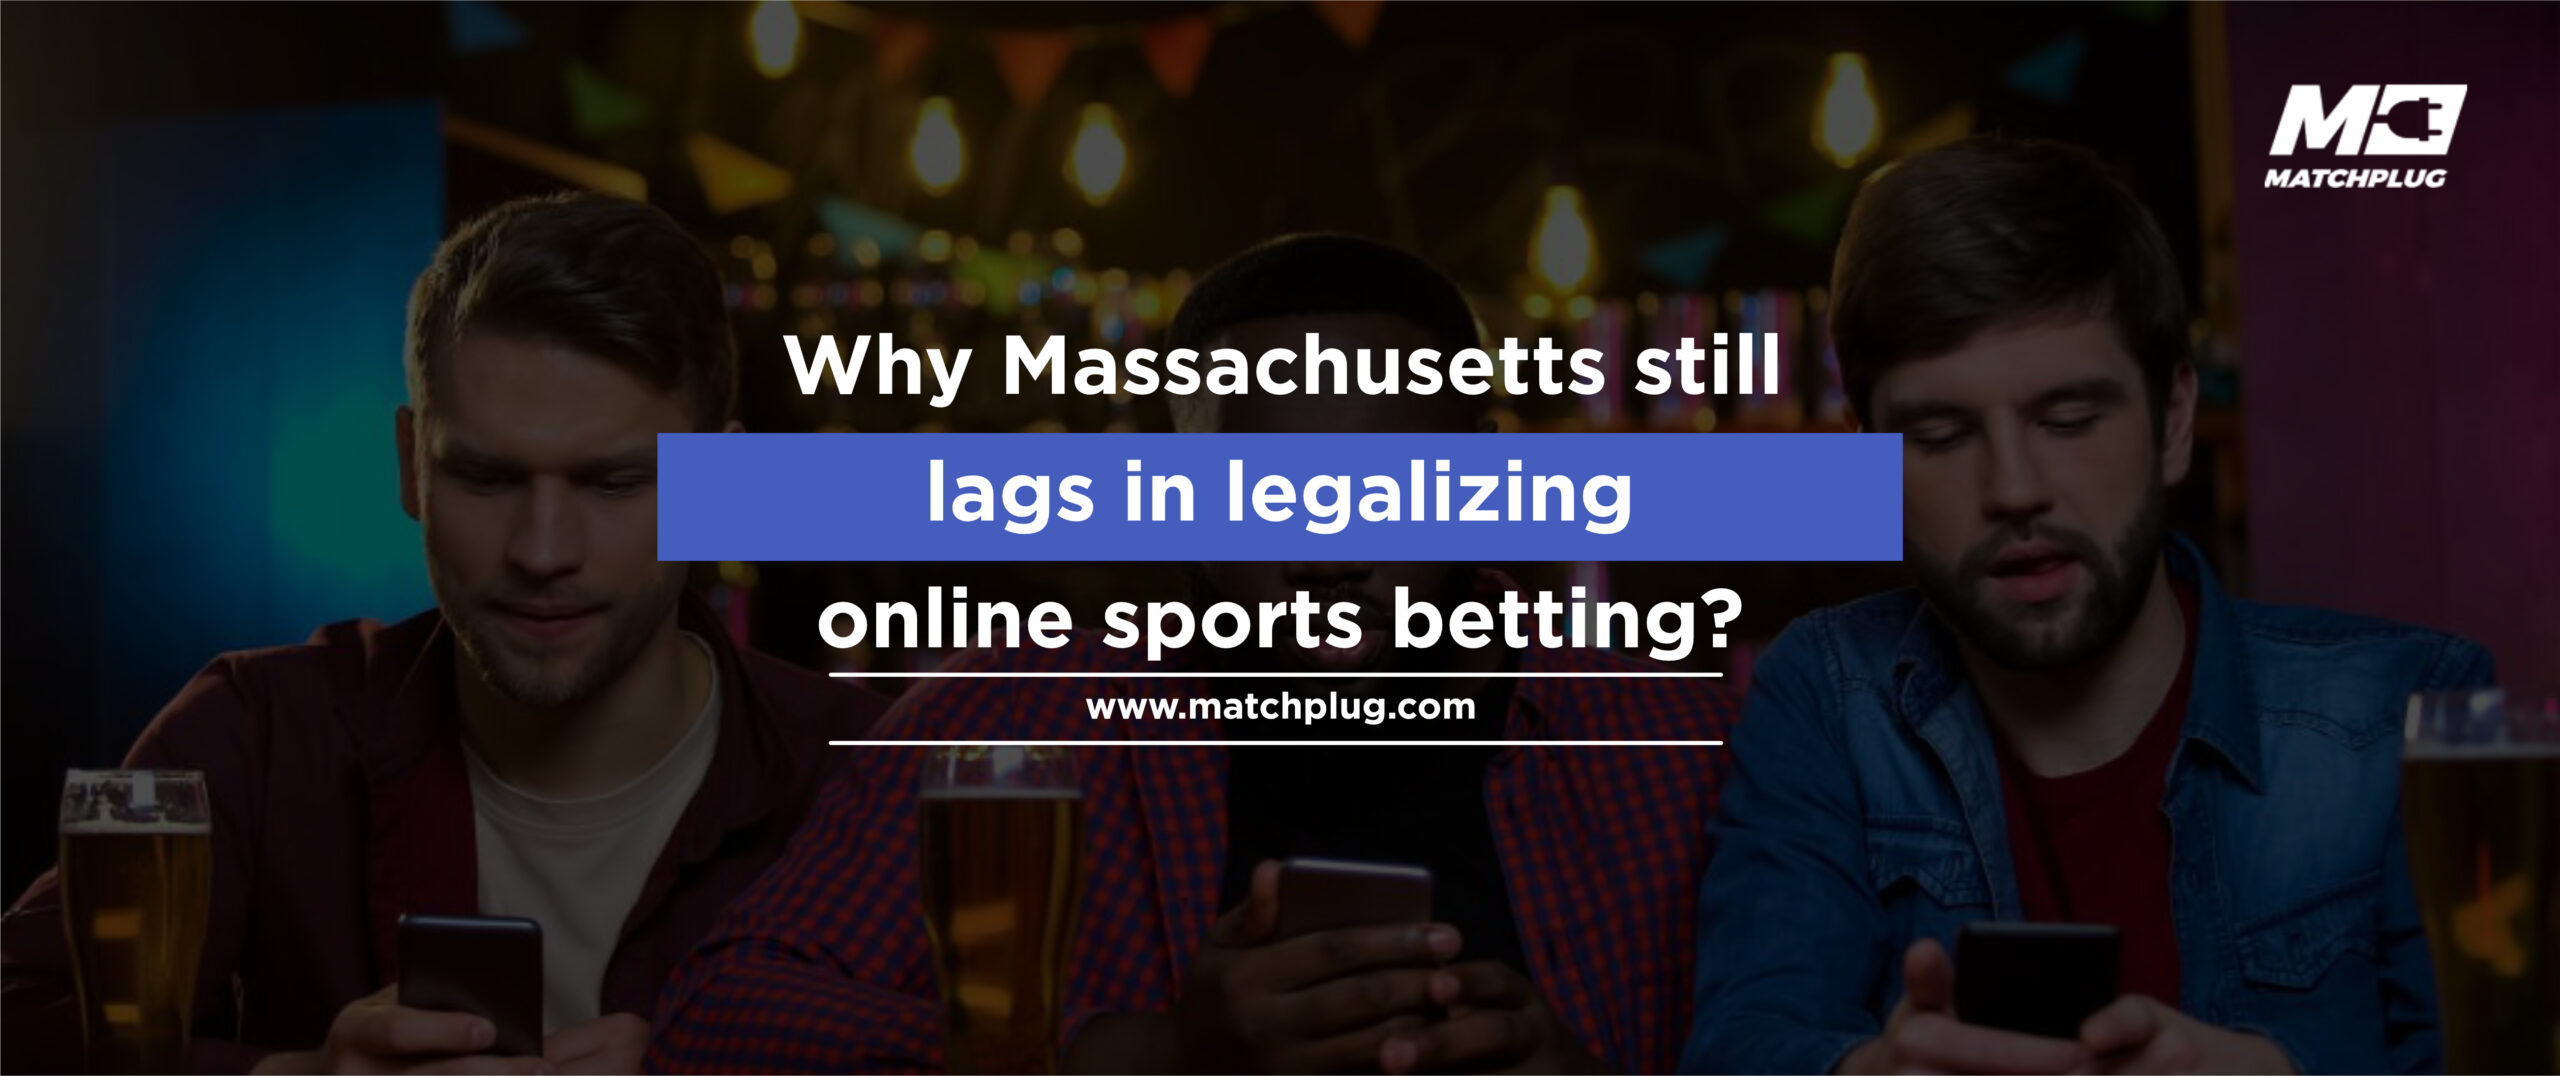 Why is the State of Massachusetts lagging behind in legalizing online sports betting?